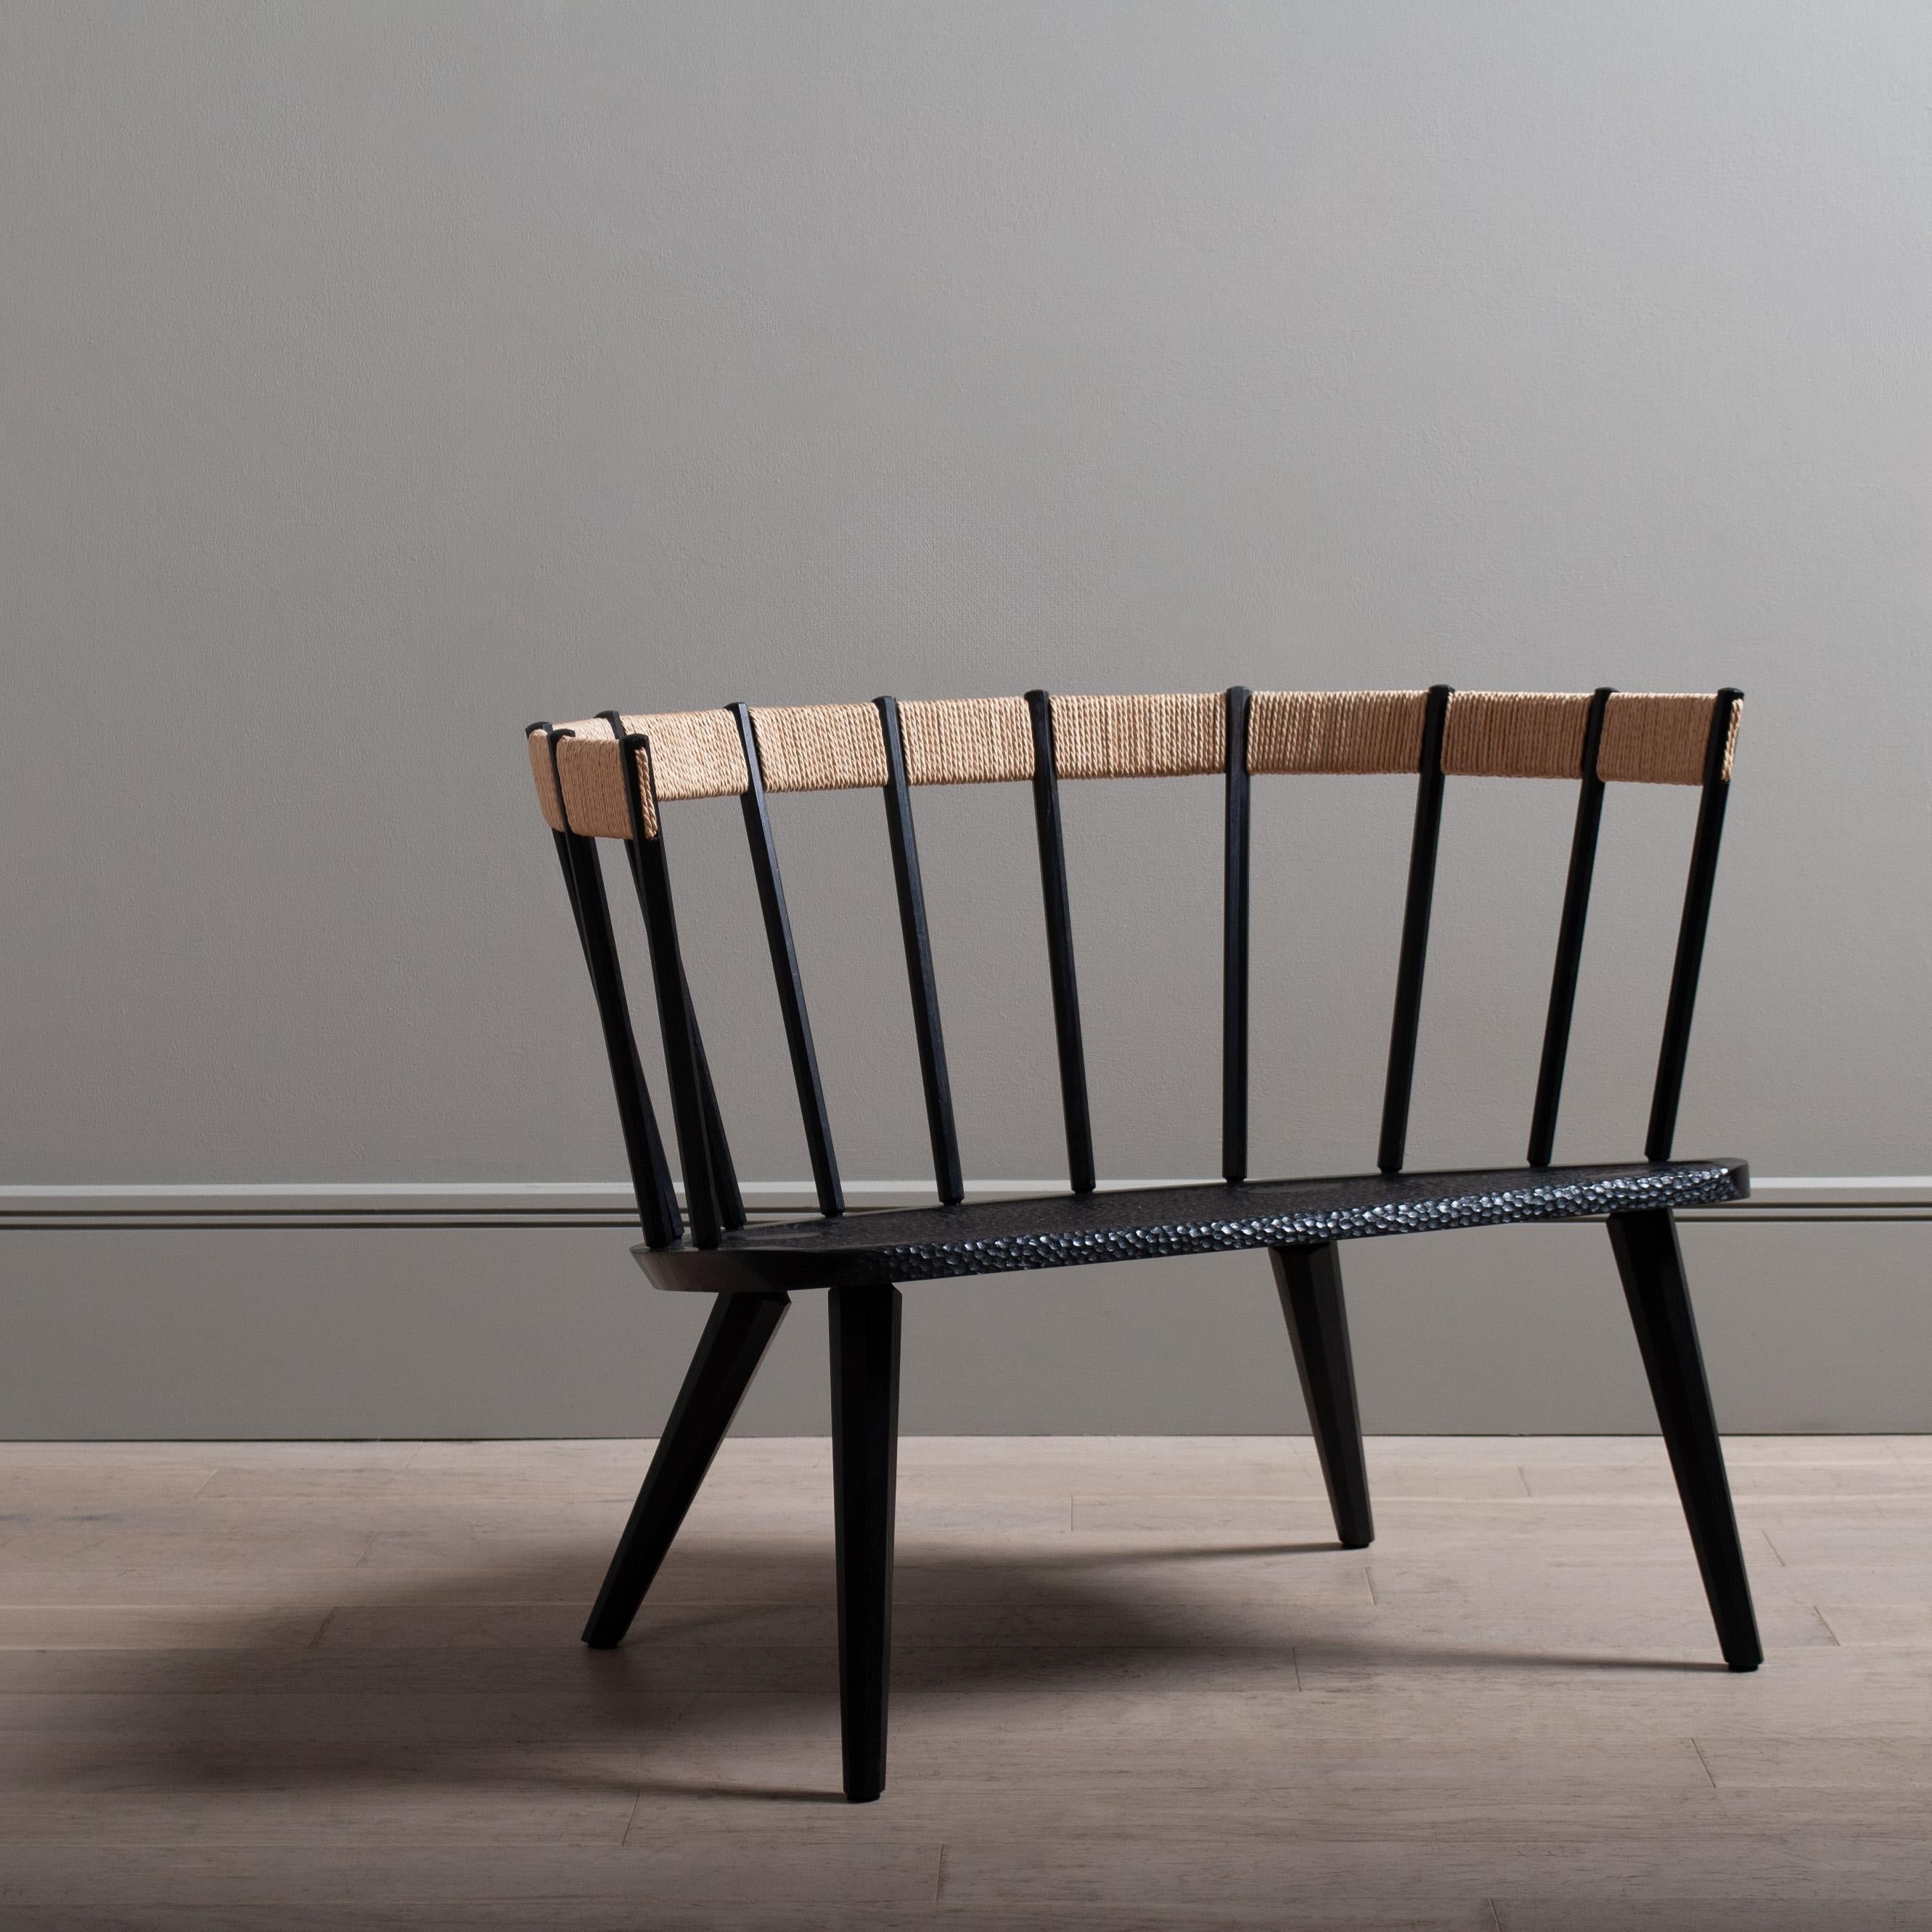 One of a kind English ebonised oak hand carved chair. 
A second iteration of this unique lounge chair by James Bowyer celebrating some of its Scandinavian ancestry with the seagrass woven back, tightly wound around a flexible timber core that gives